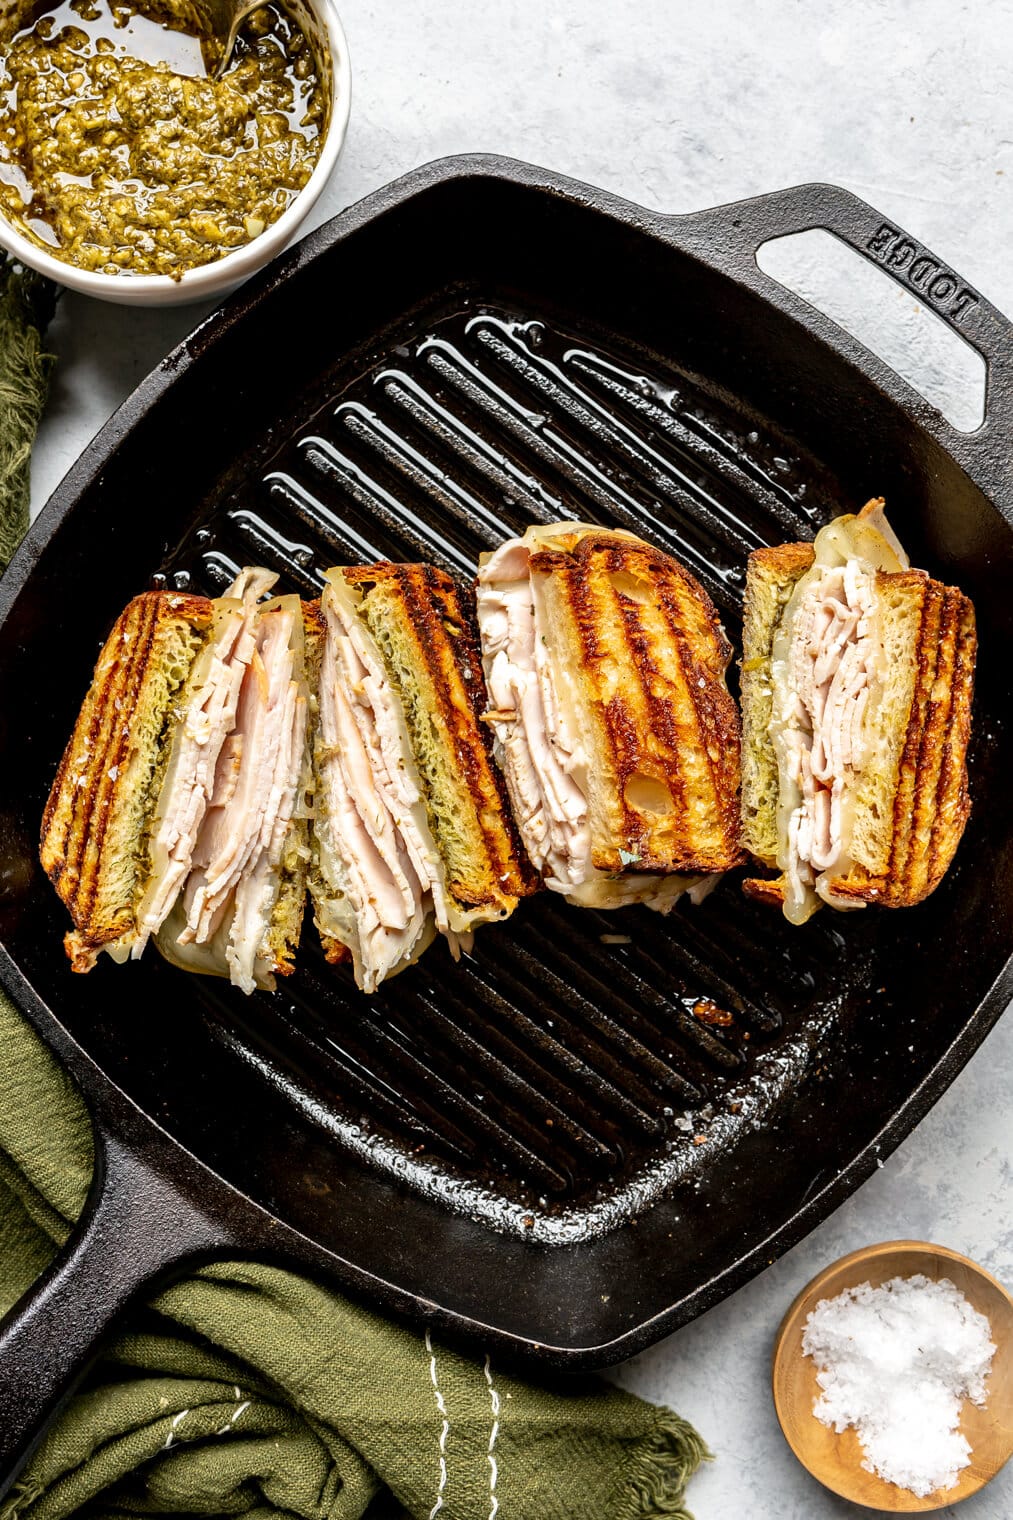 Grilled cheese sandwiches in a cast iron grill pan.